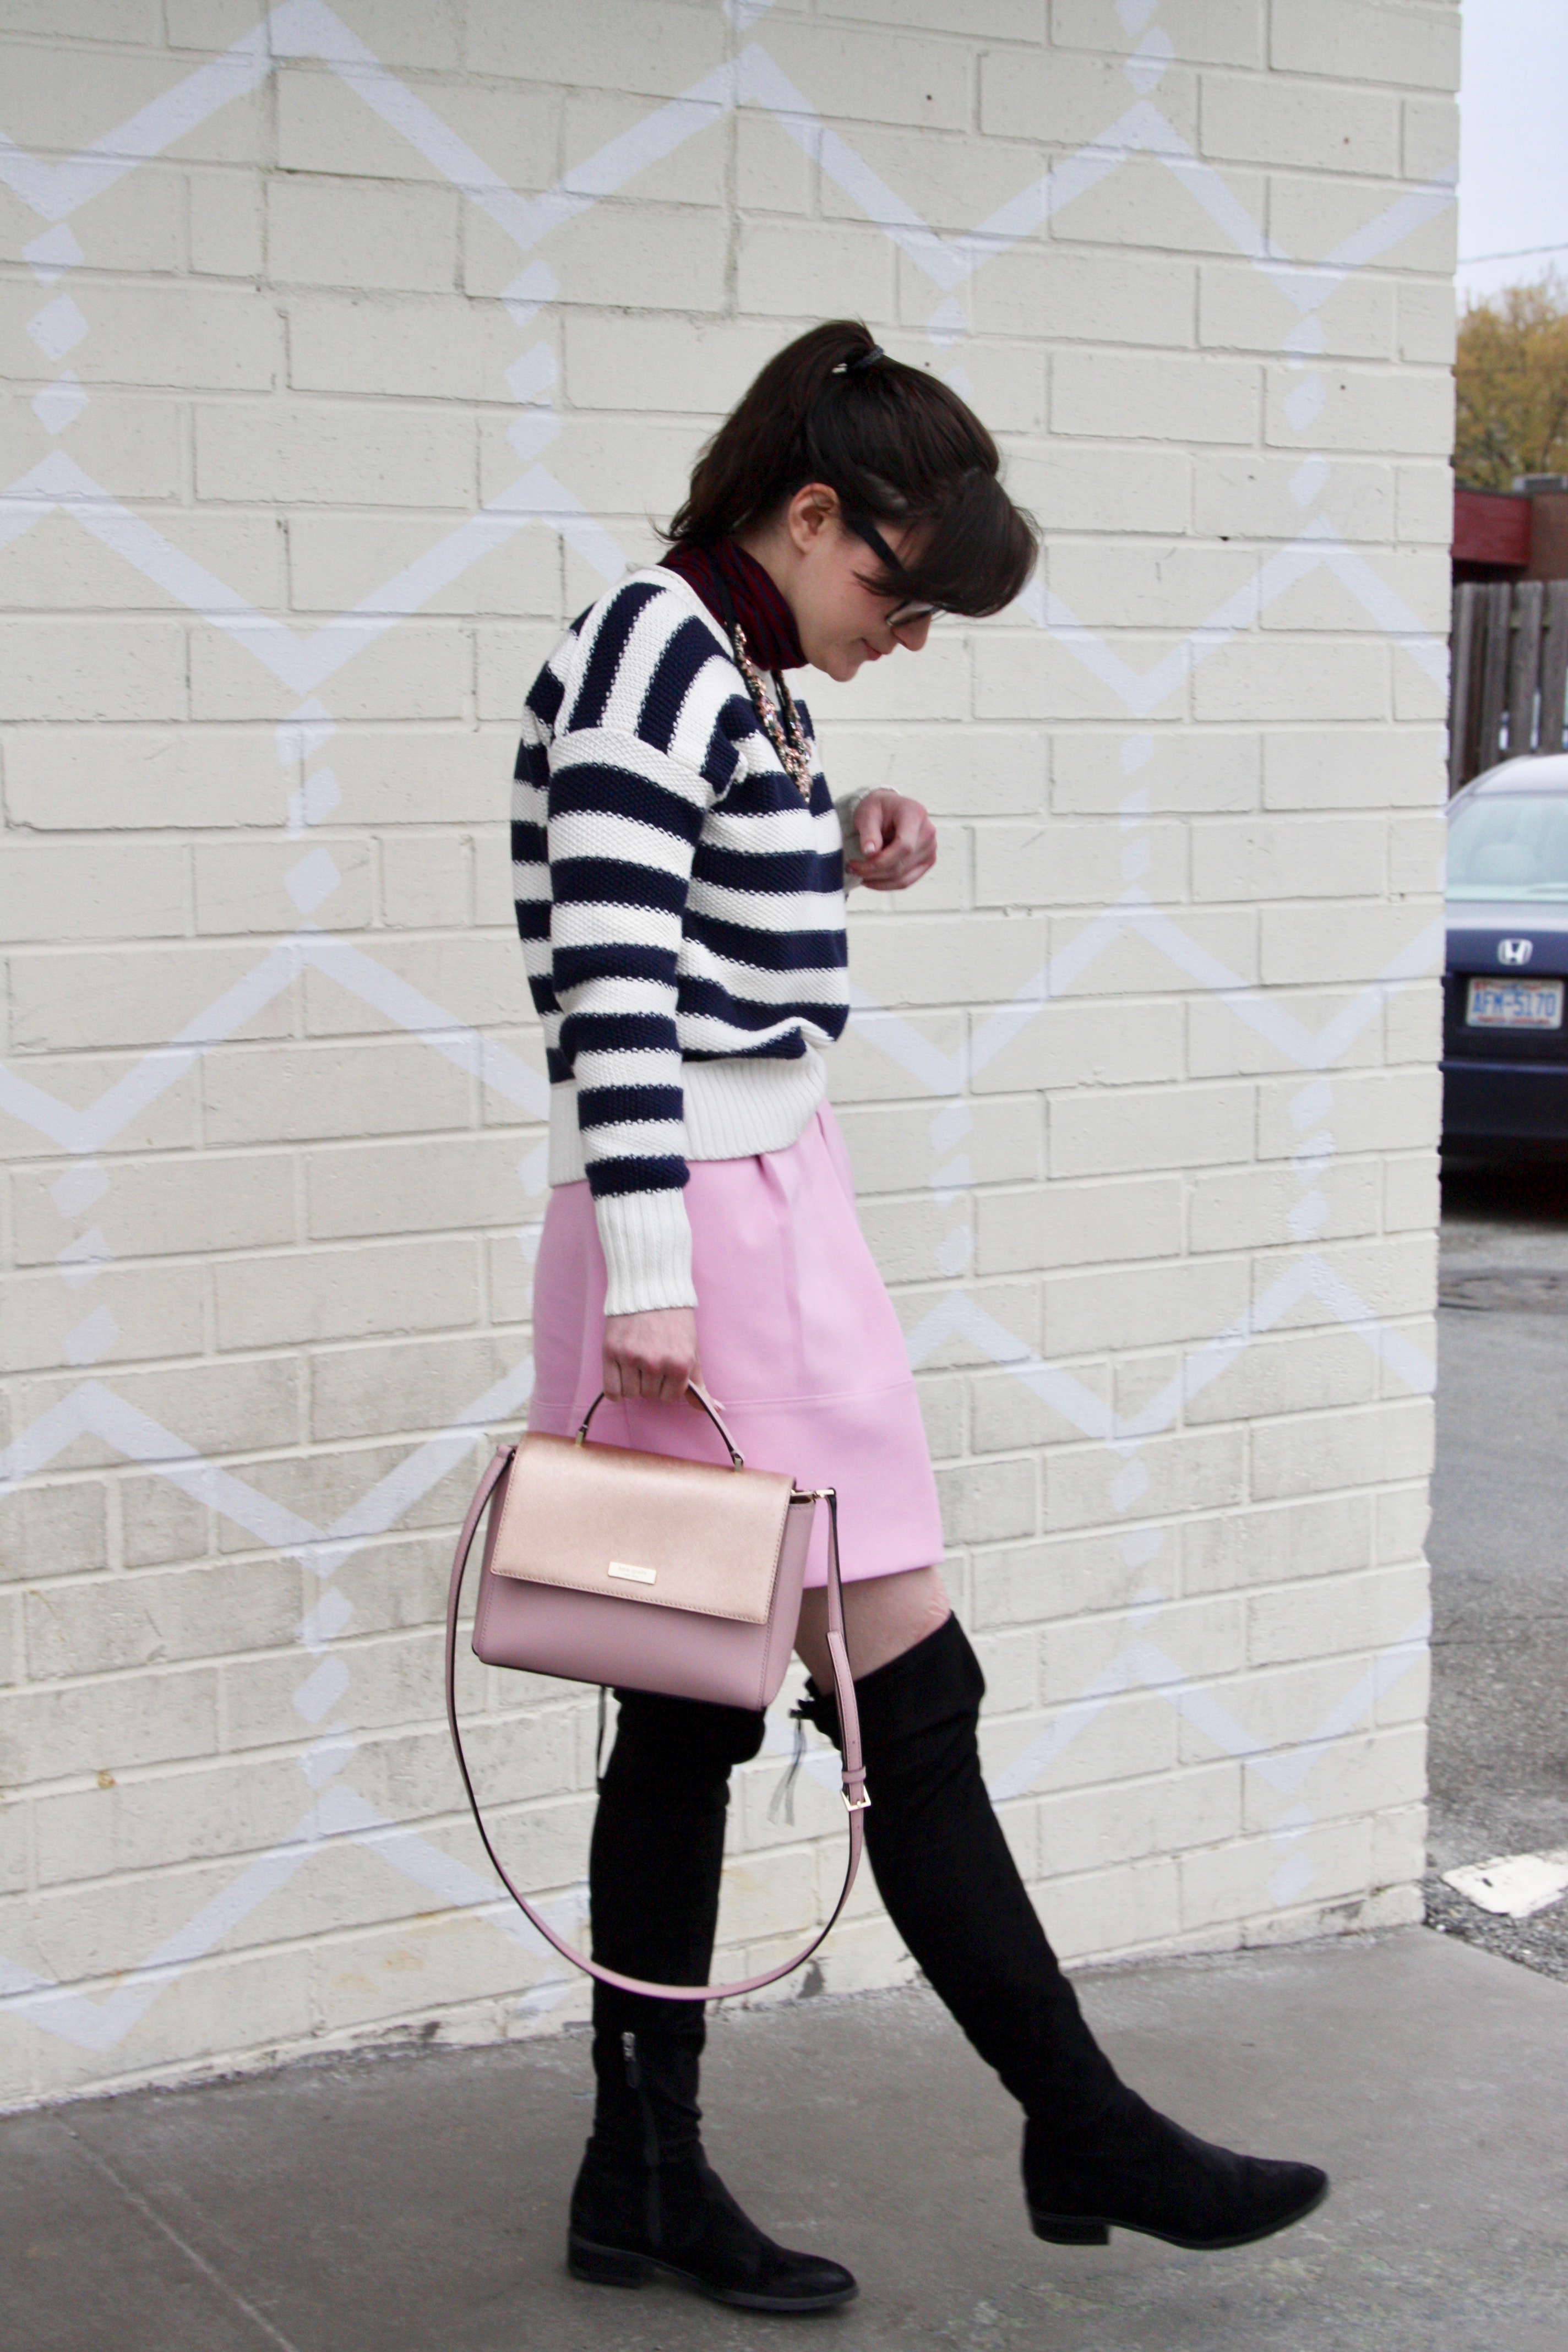 Stripes on Stripes with Lots of Pink - Lefty Living Life